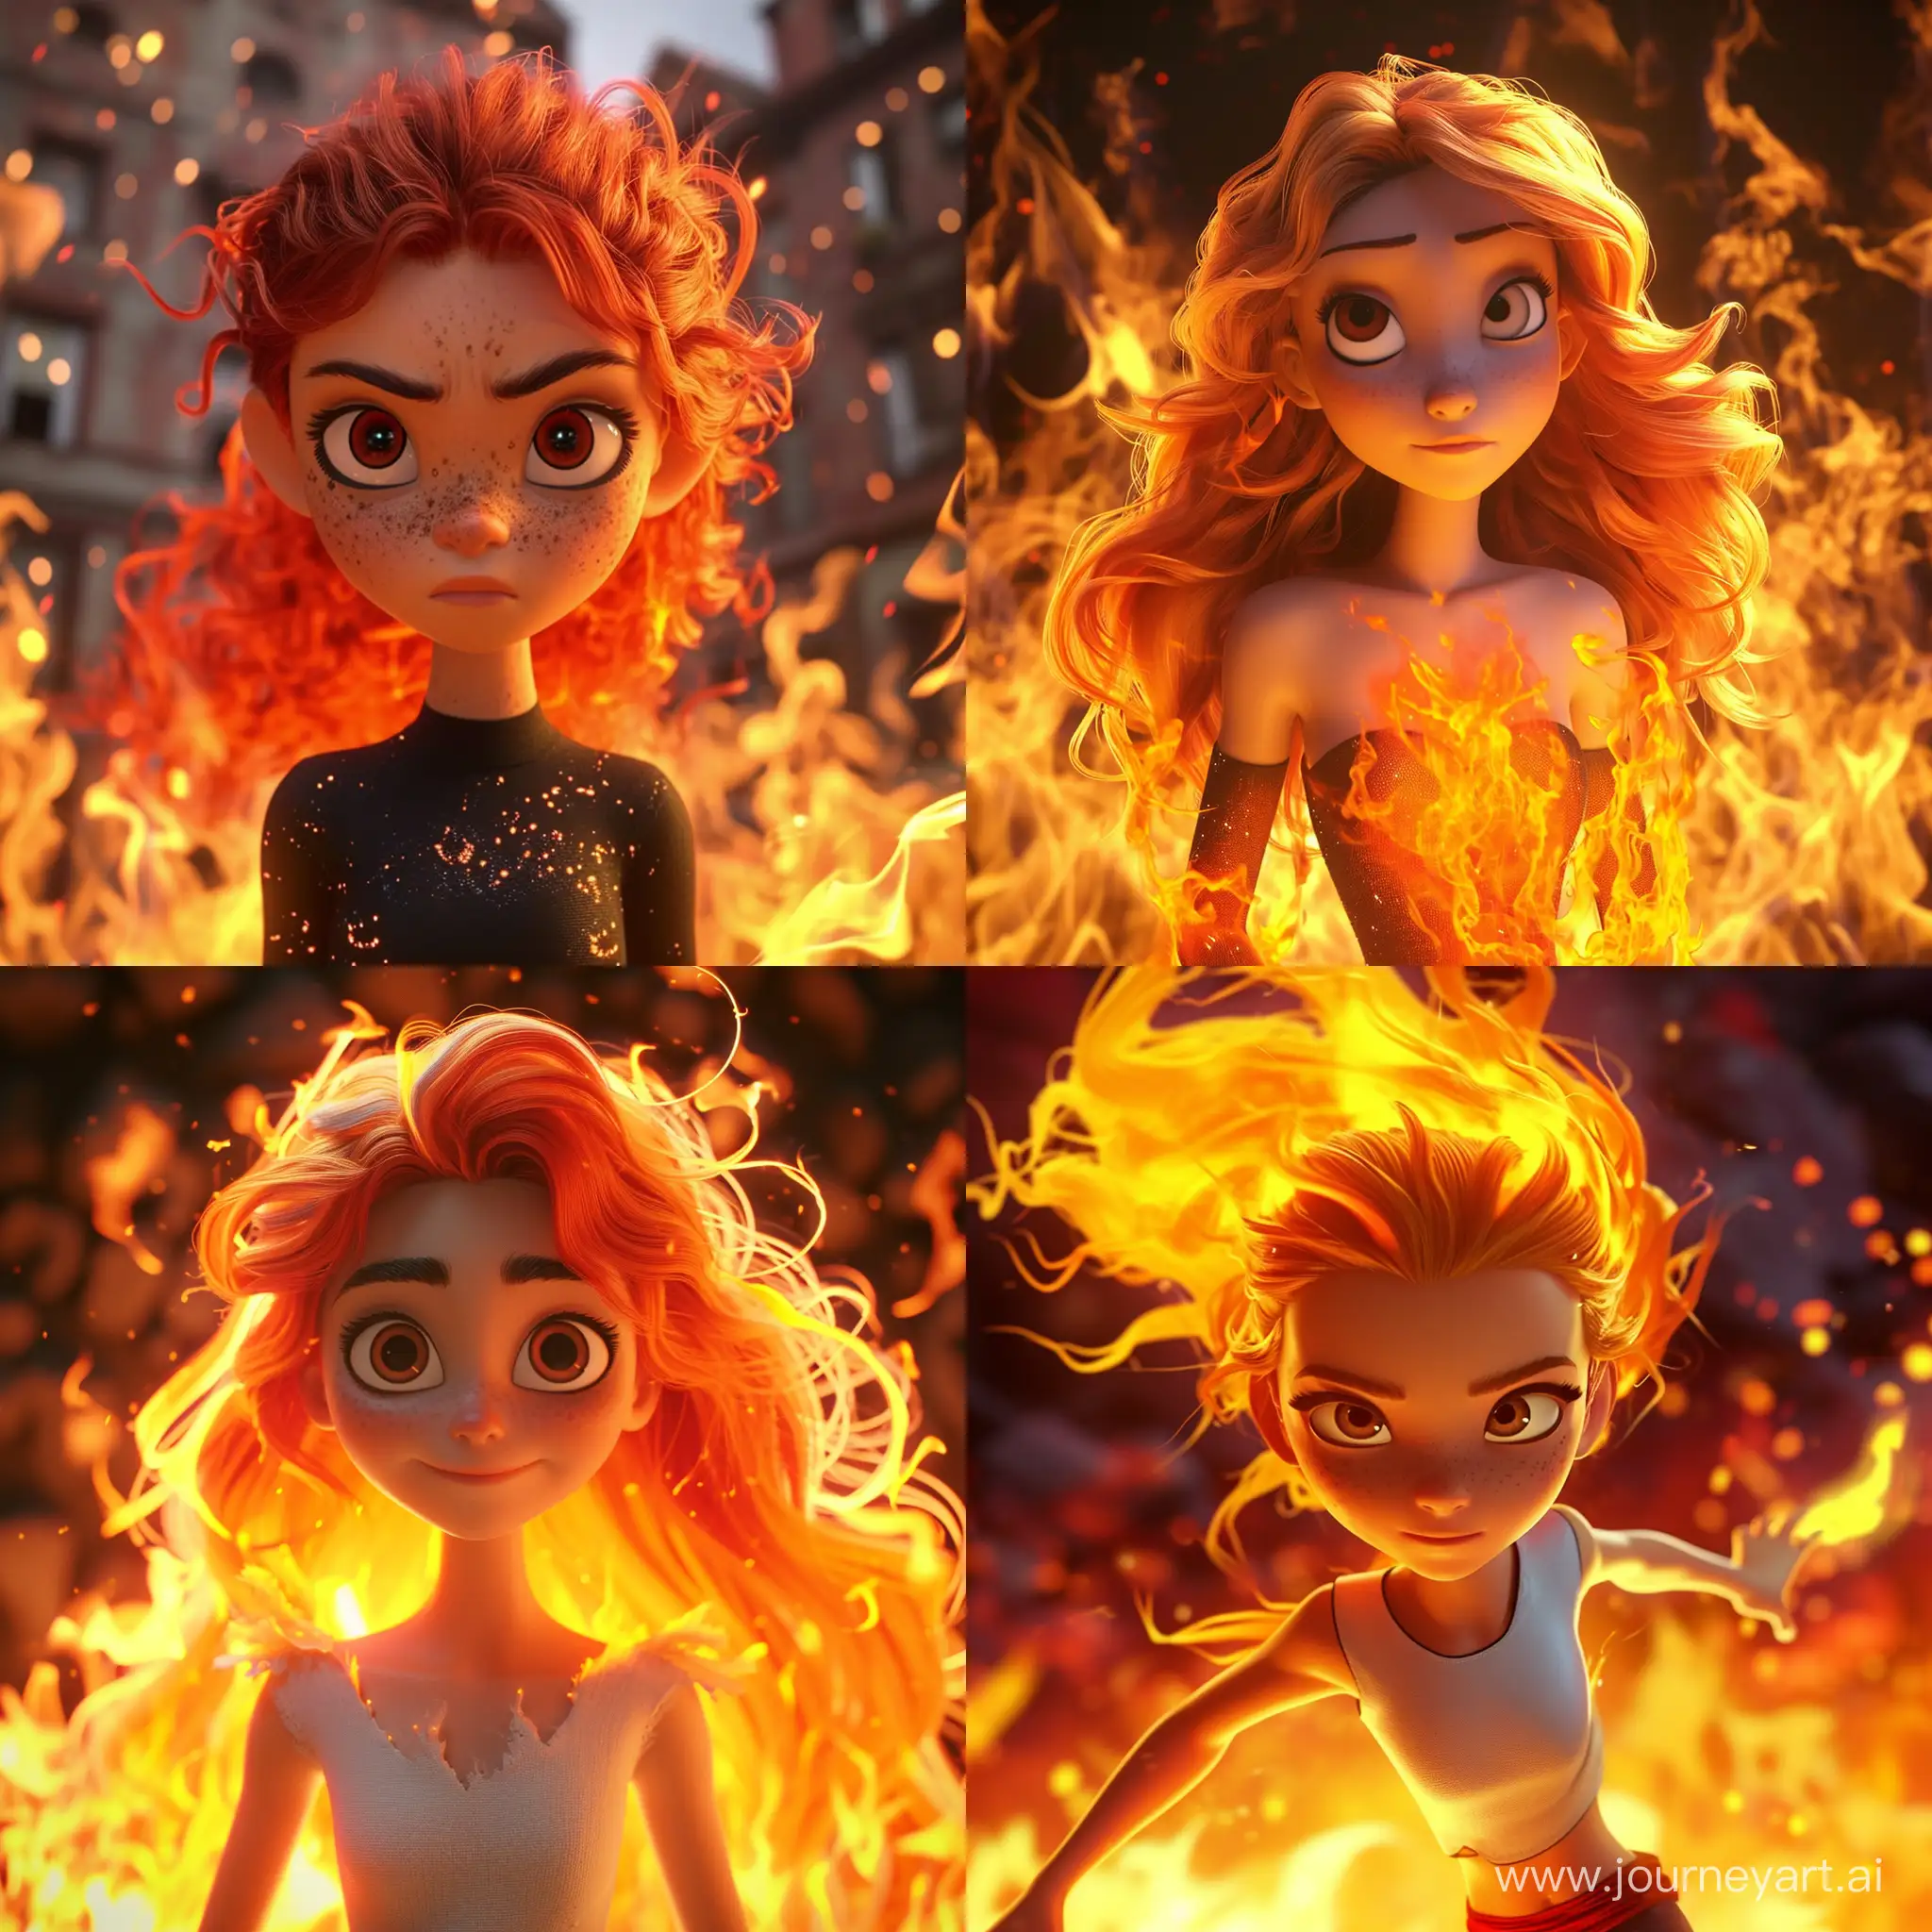 Enchanting-Animated-Tale-Fire-Girl-in-Vibrant-11-Aspect-Ratio